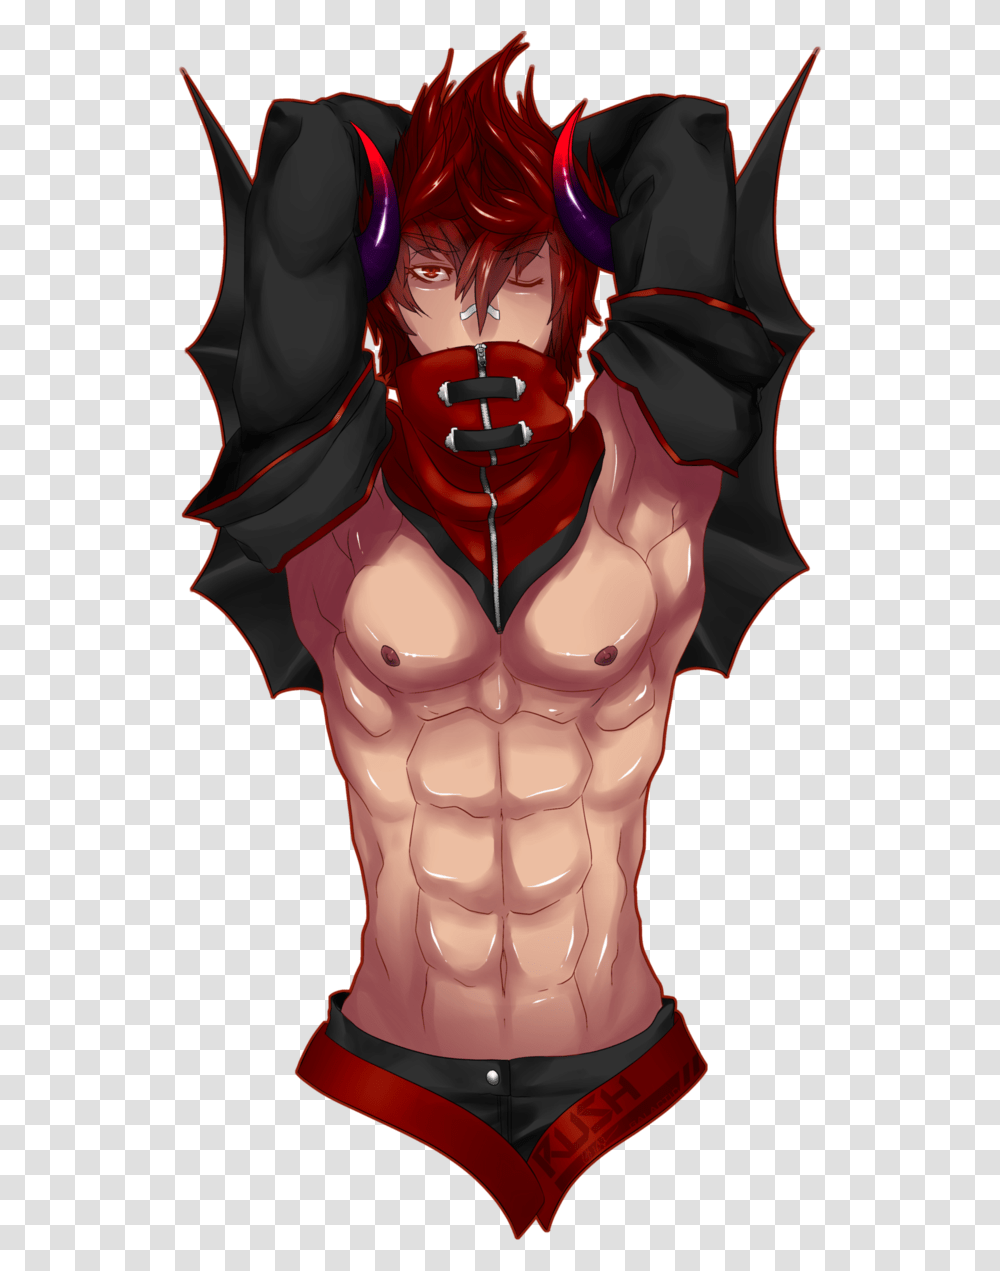 Download Buff 2 By Galactic Rush Anime Muscular Male Abs Anime Boy With Abs, Torso, Cape, Clothing, Apparel Transparent Png